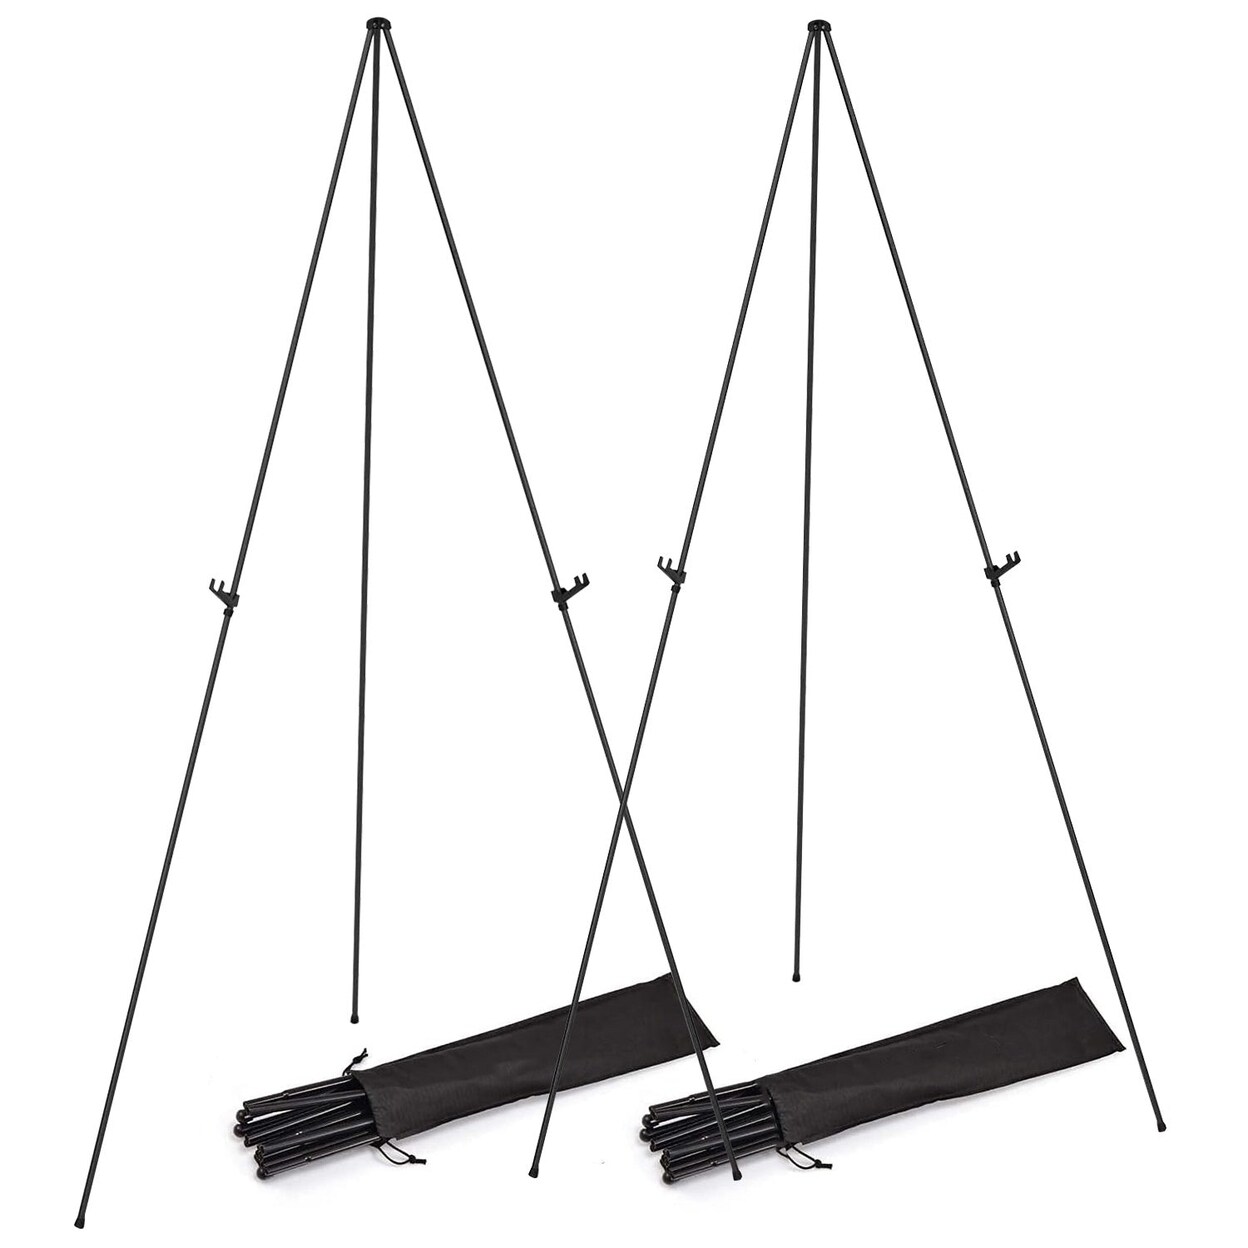 SKUSHOPS 2 Pack Easel Stand for Display 61in Collapsible A Frame Tripod Easel Iron Alloy Drawing Stand with 2 Carry Bags for